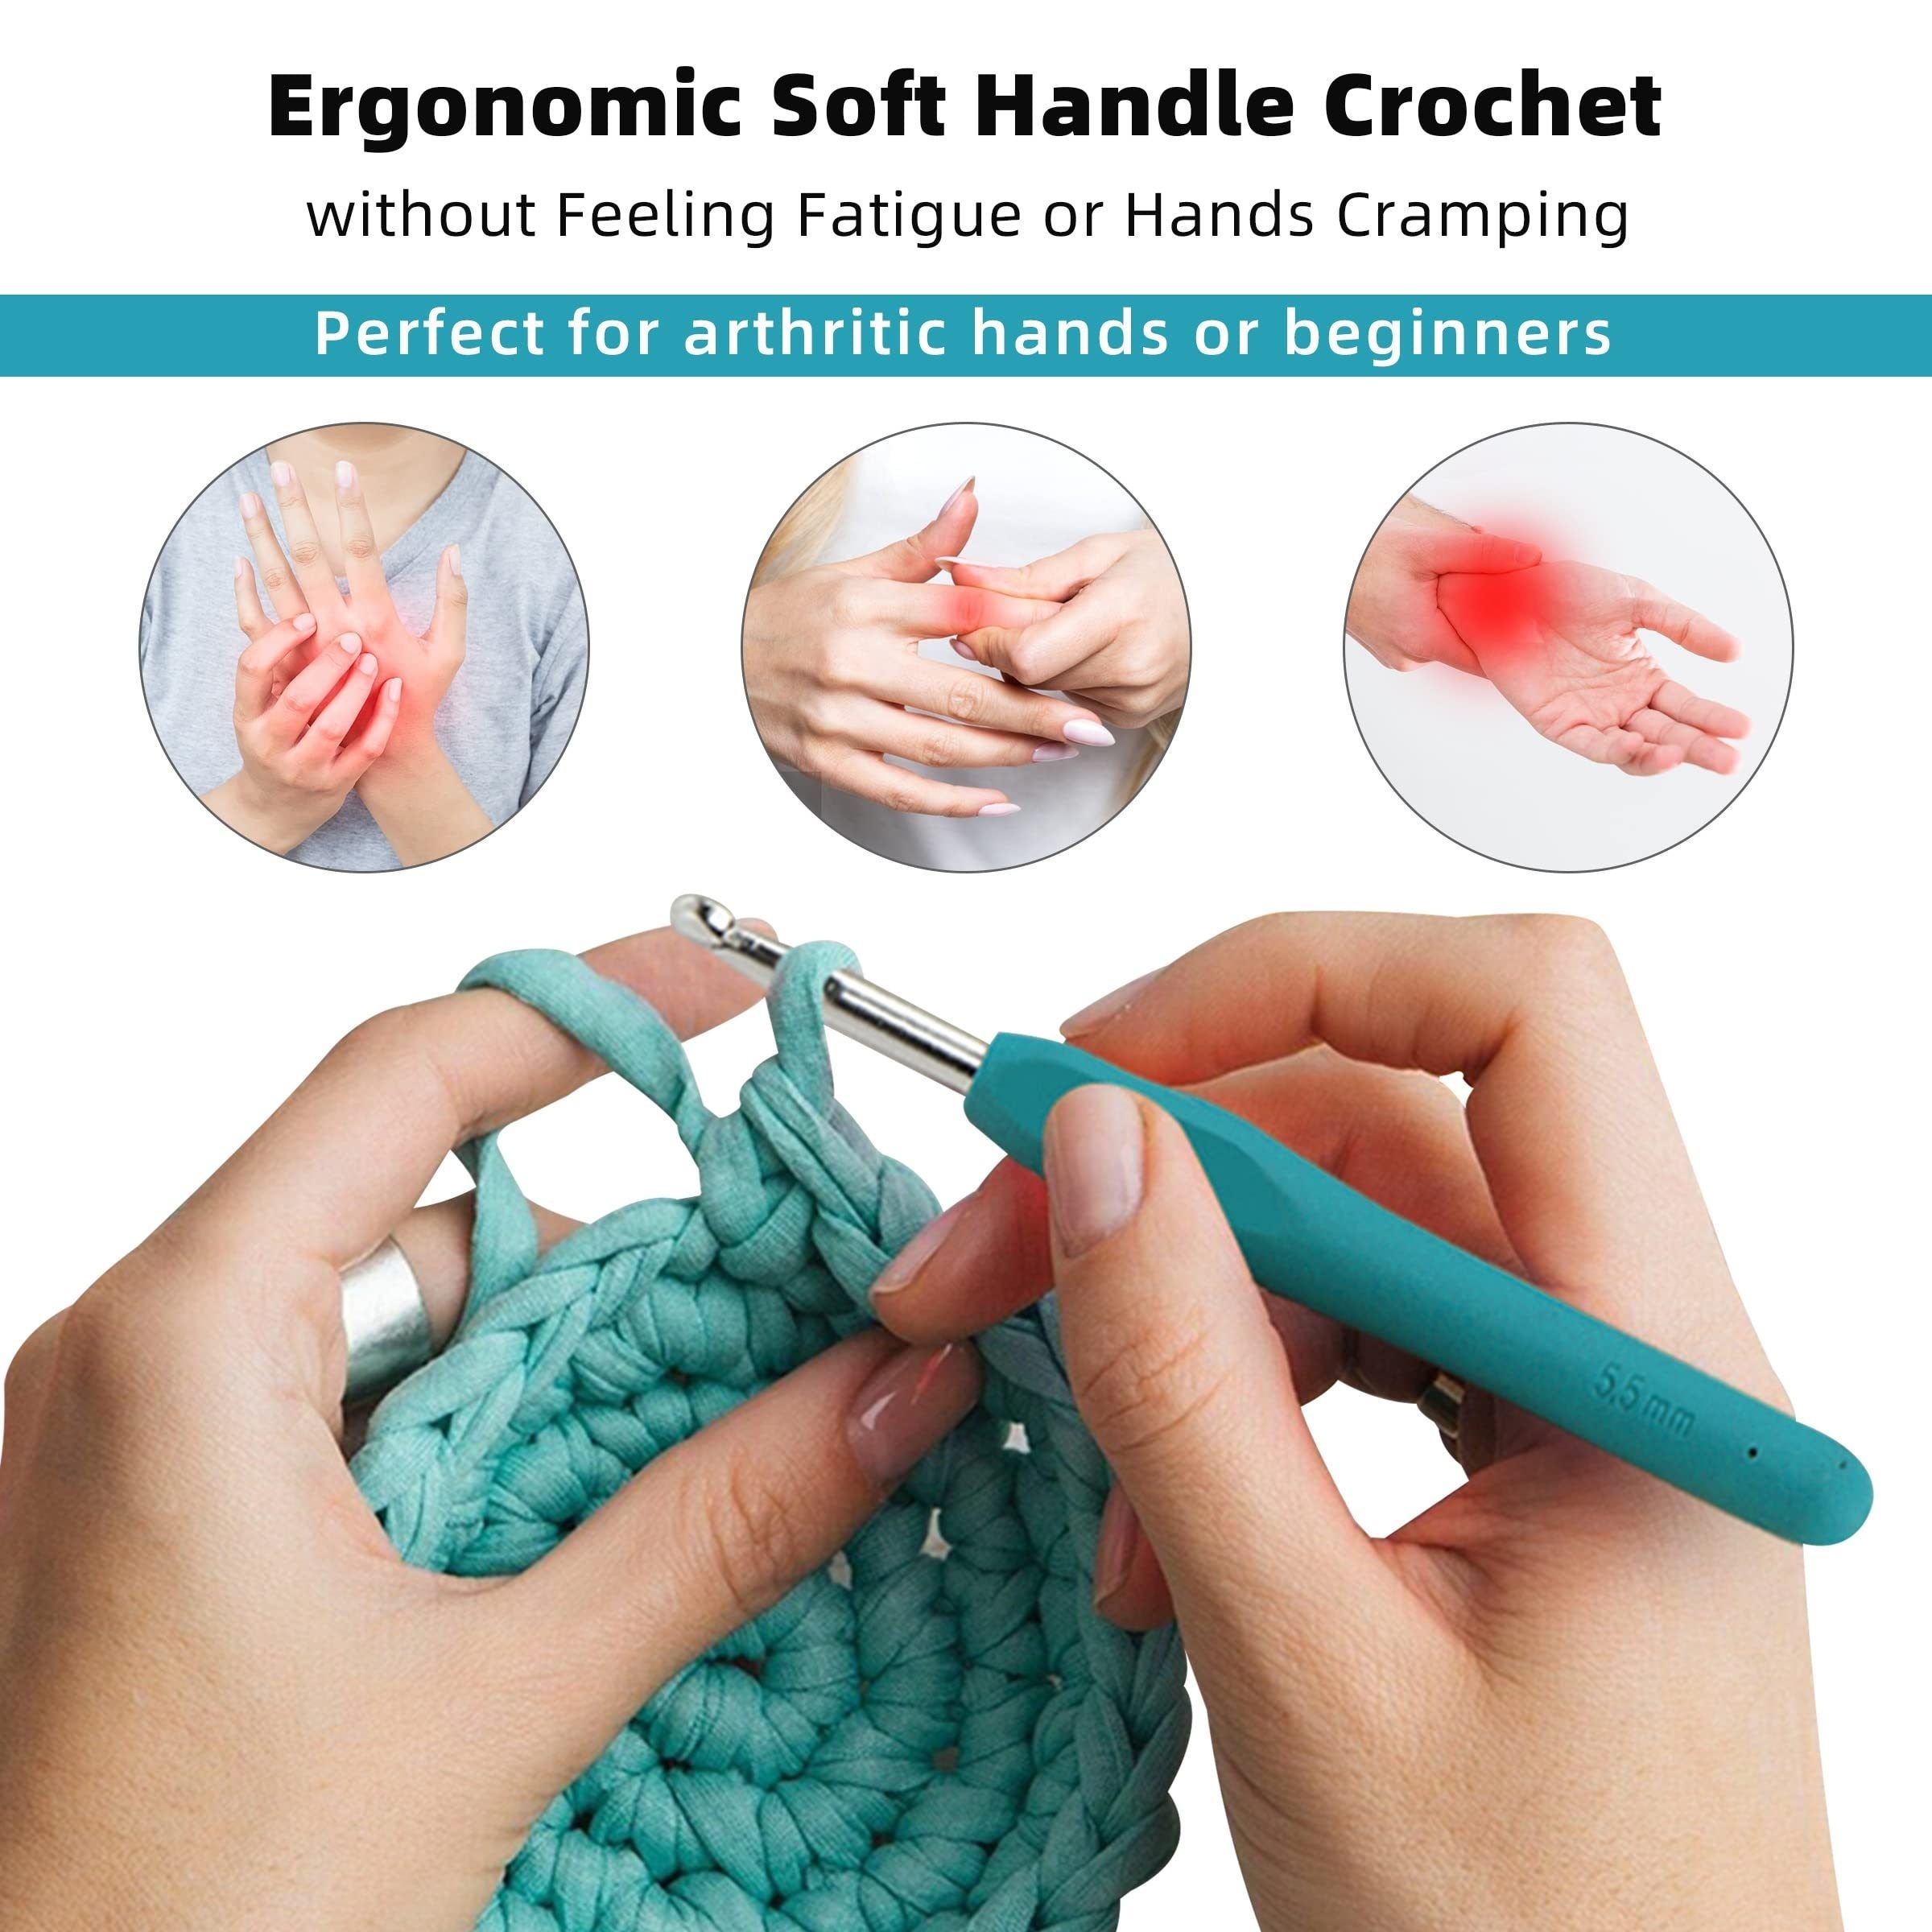 4.5mm Crochet Hook, Wooden Handle Crochet, Ergonomic Crochet with 10 Pcs  Stitch Markers for Arthritic Hand, and Beginners and Lovers DIY 